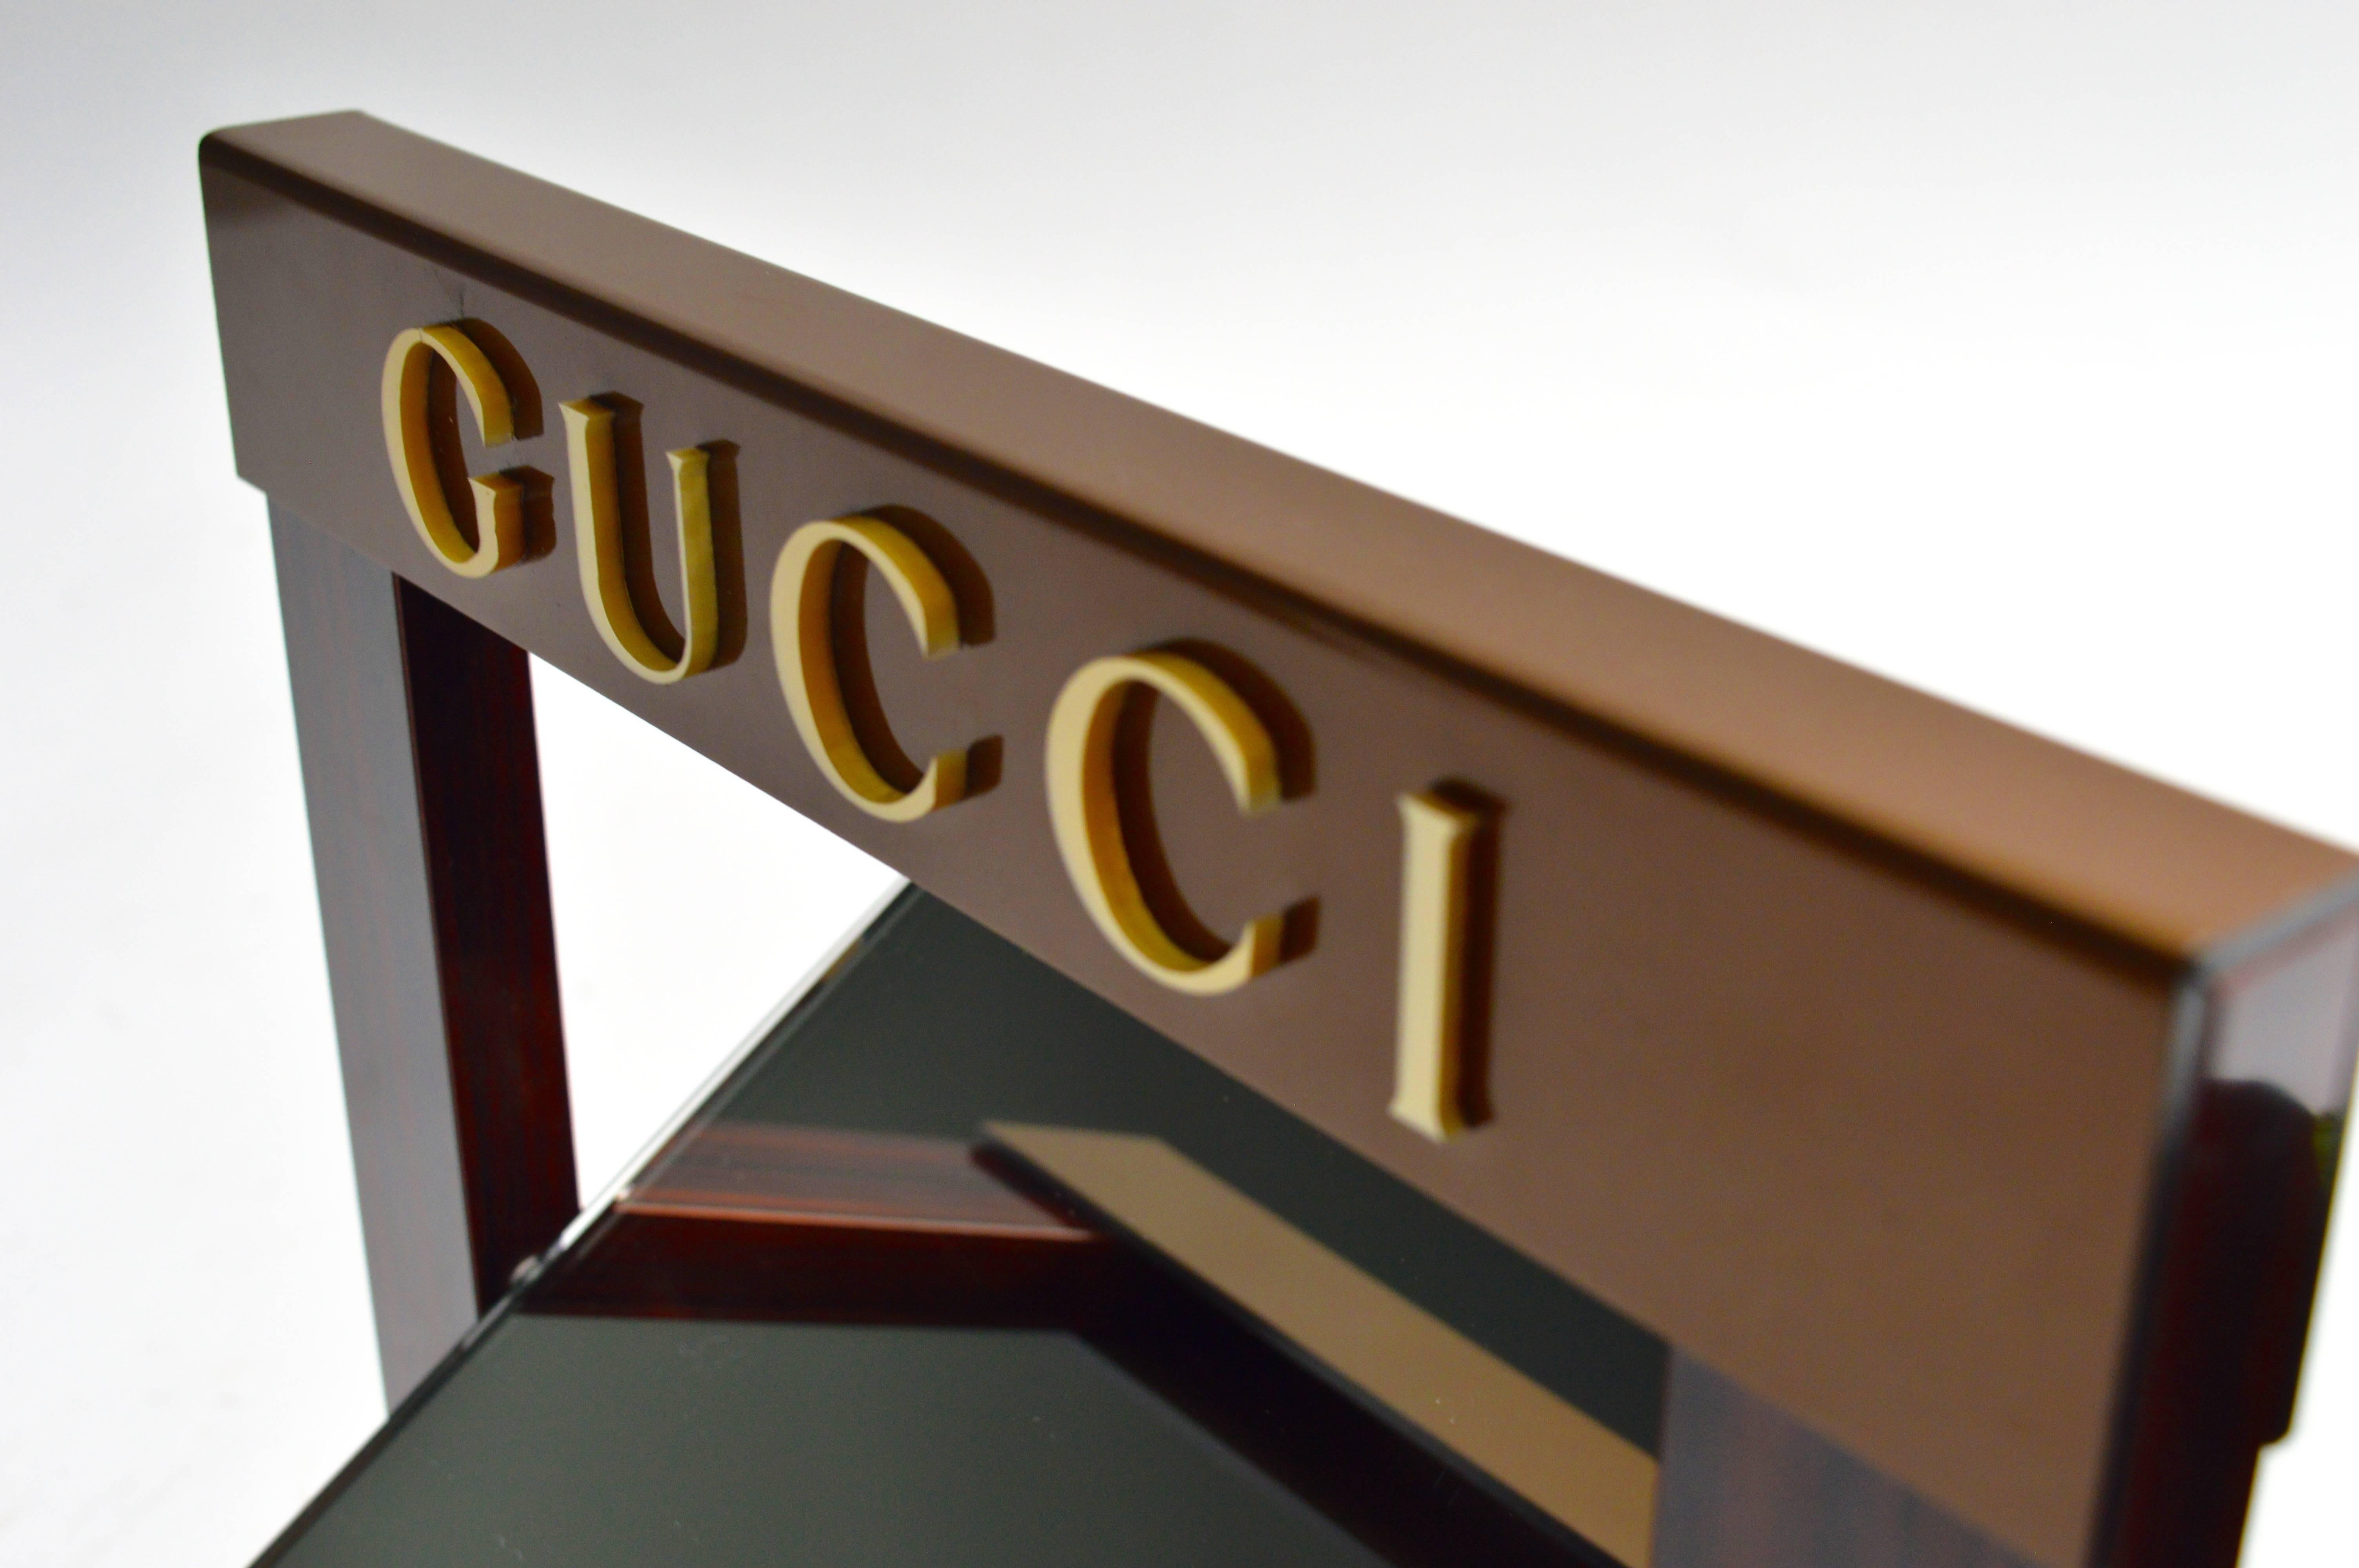 Vintage Gucci dealer mirror. Most likely used by Gucci as a store display. Front of glass is in perfect condition. Backing has a crack and has been glued. Slight cracking to one of the letters on the front. Very unique piece in very good vintage